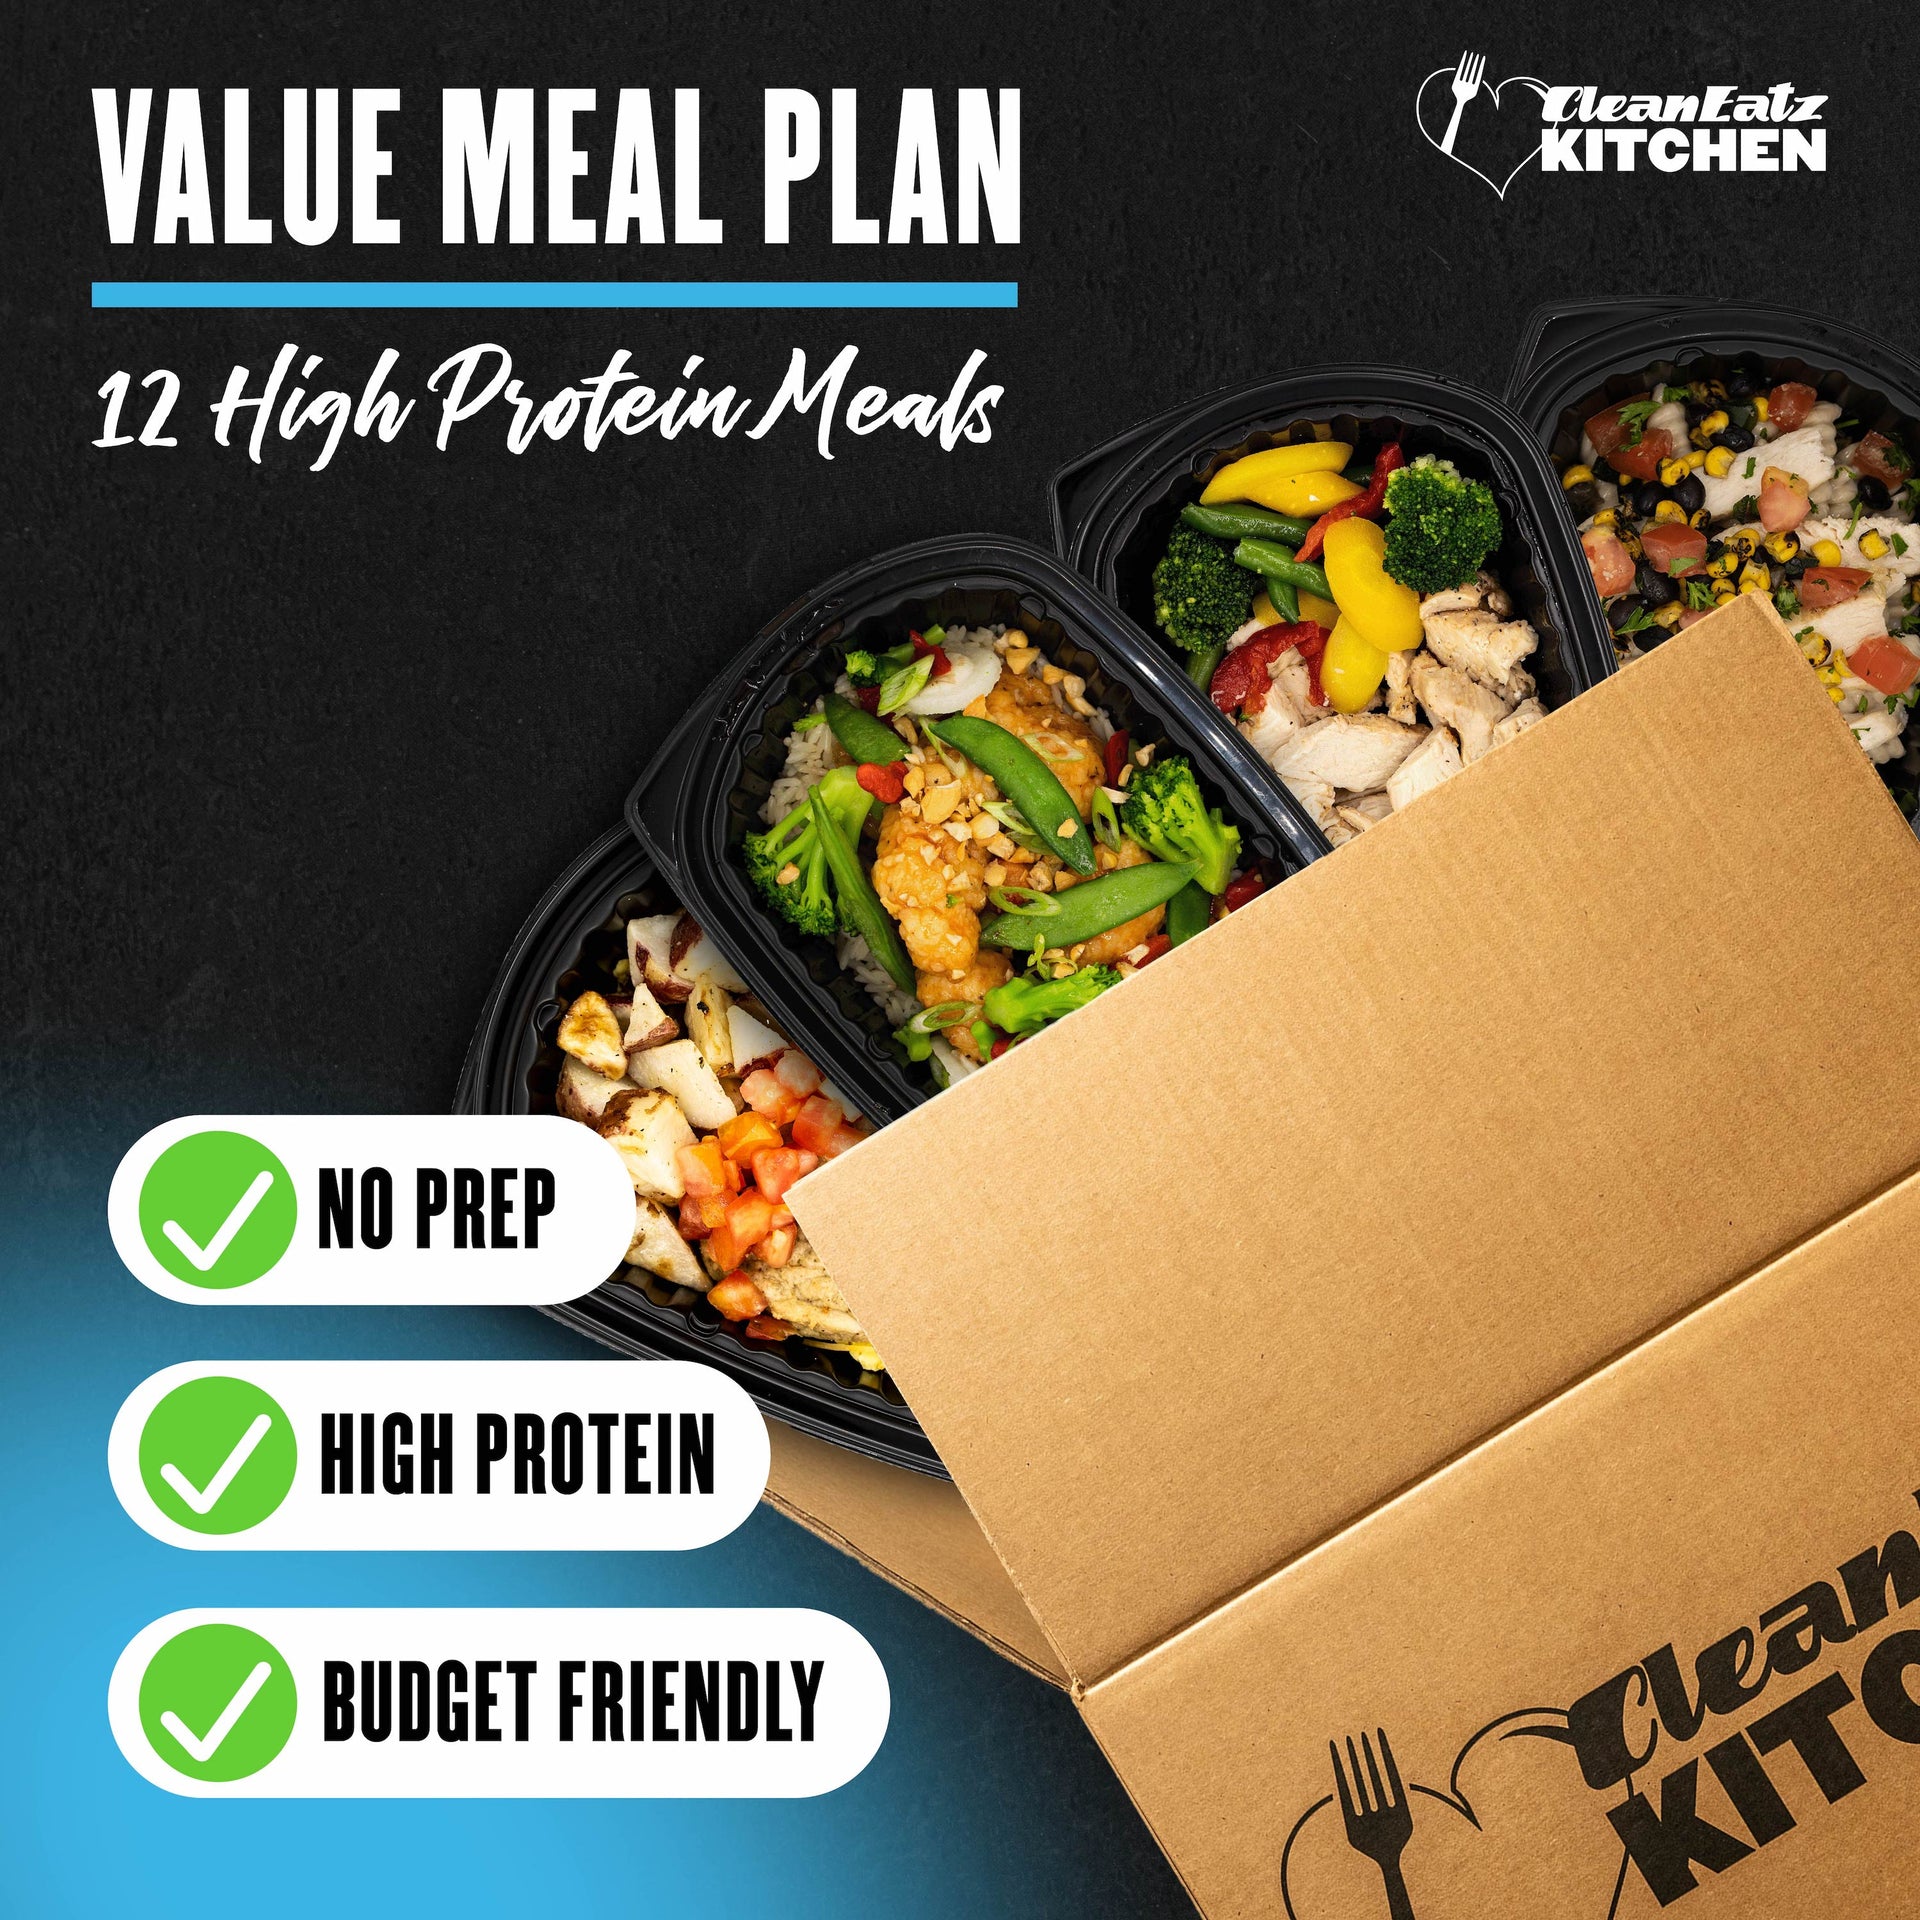 Value meal packages